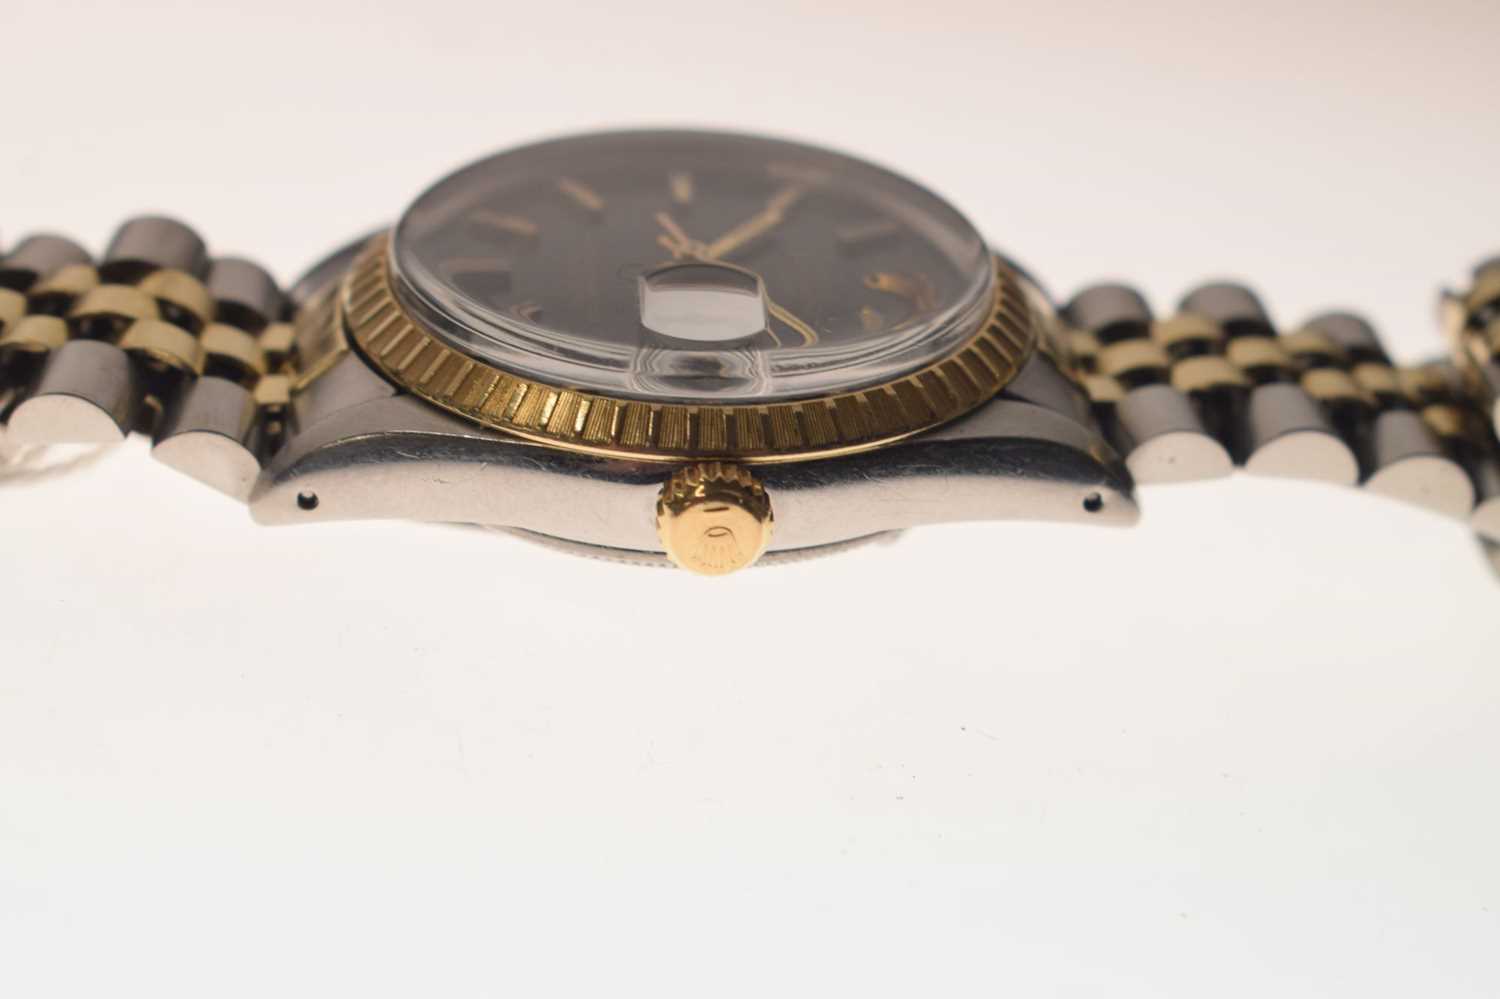 Rolex - Early 1980s Datejust Oyster Perpetual Superlative Chronometer - Image 5 of 16